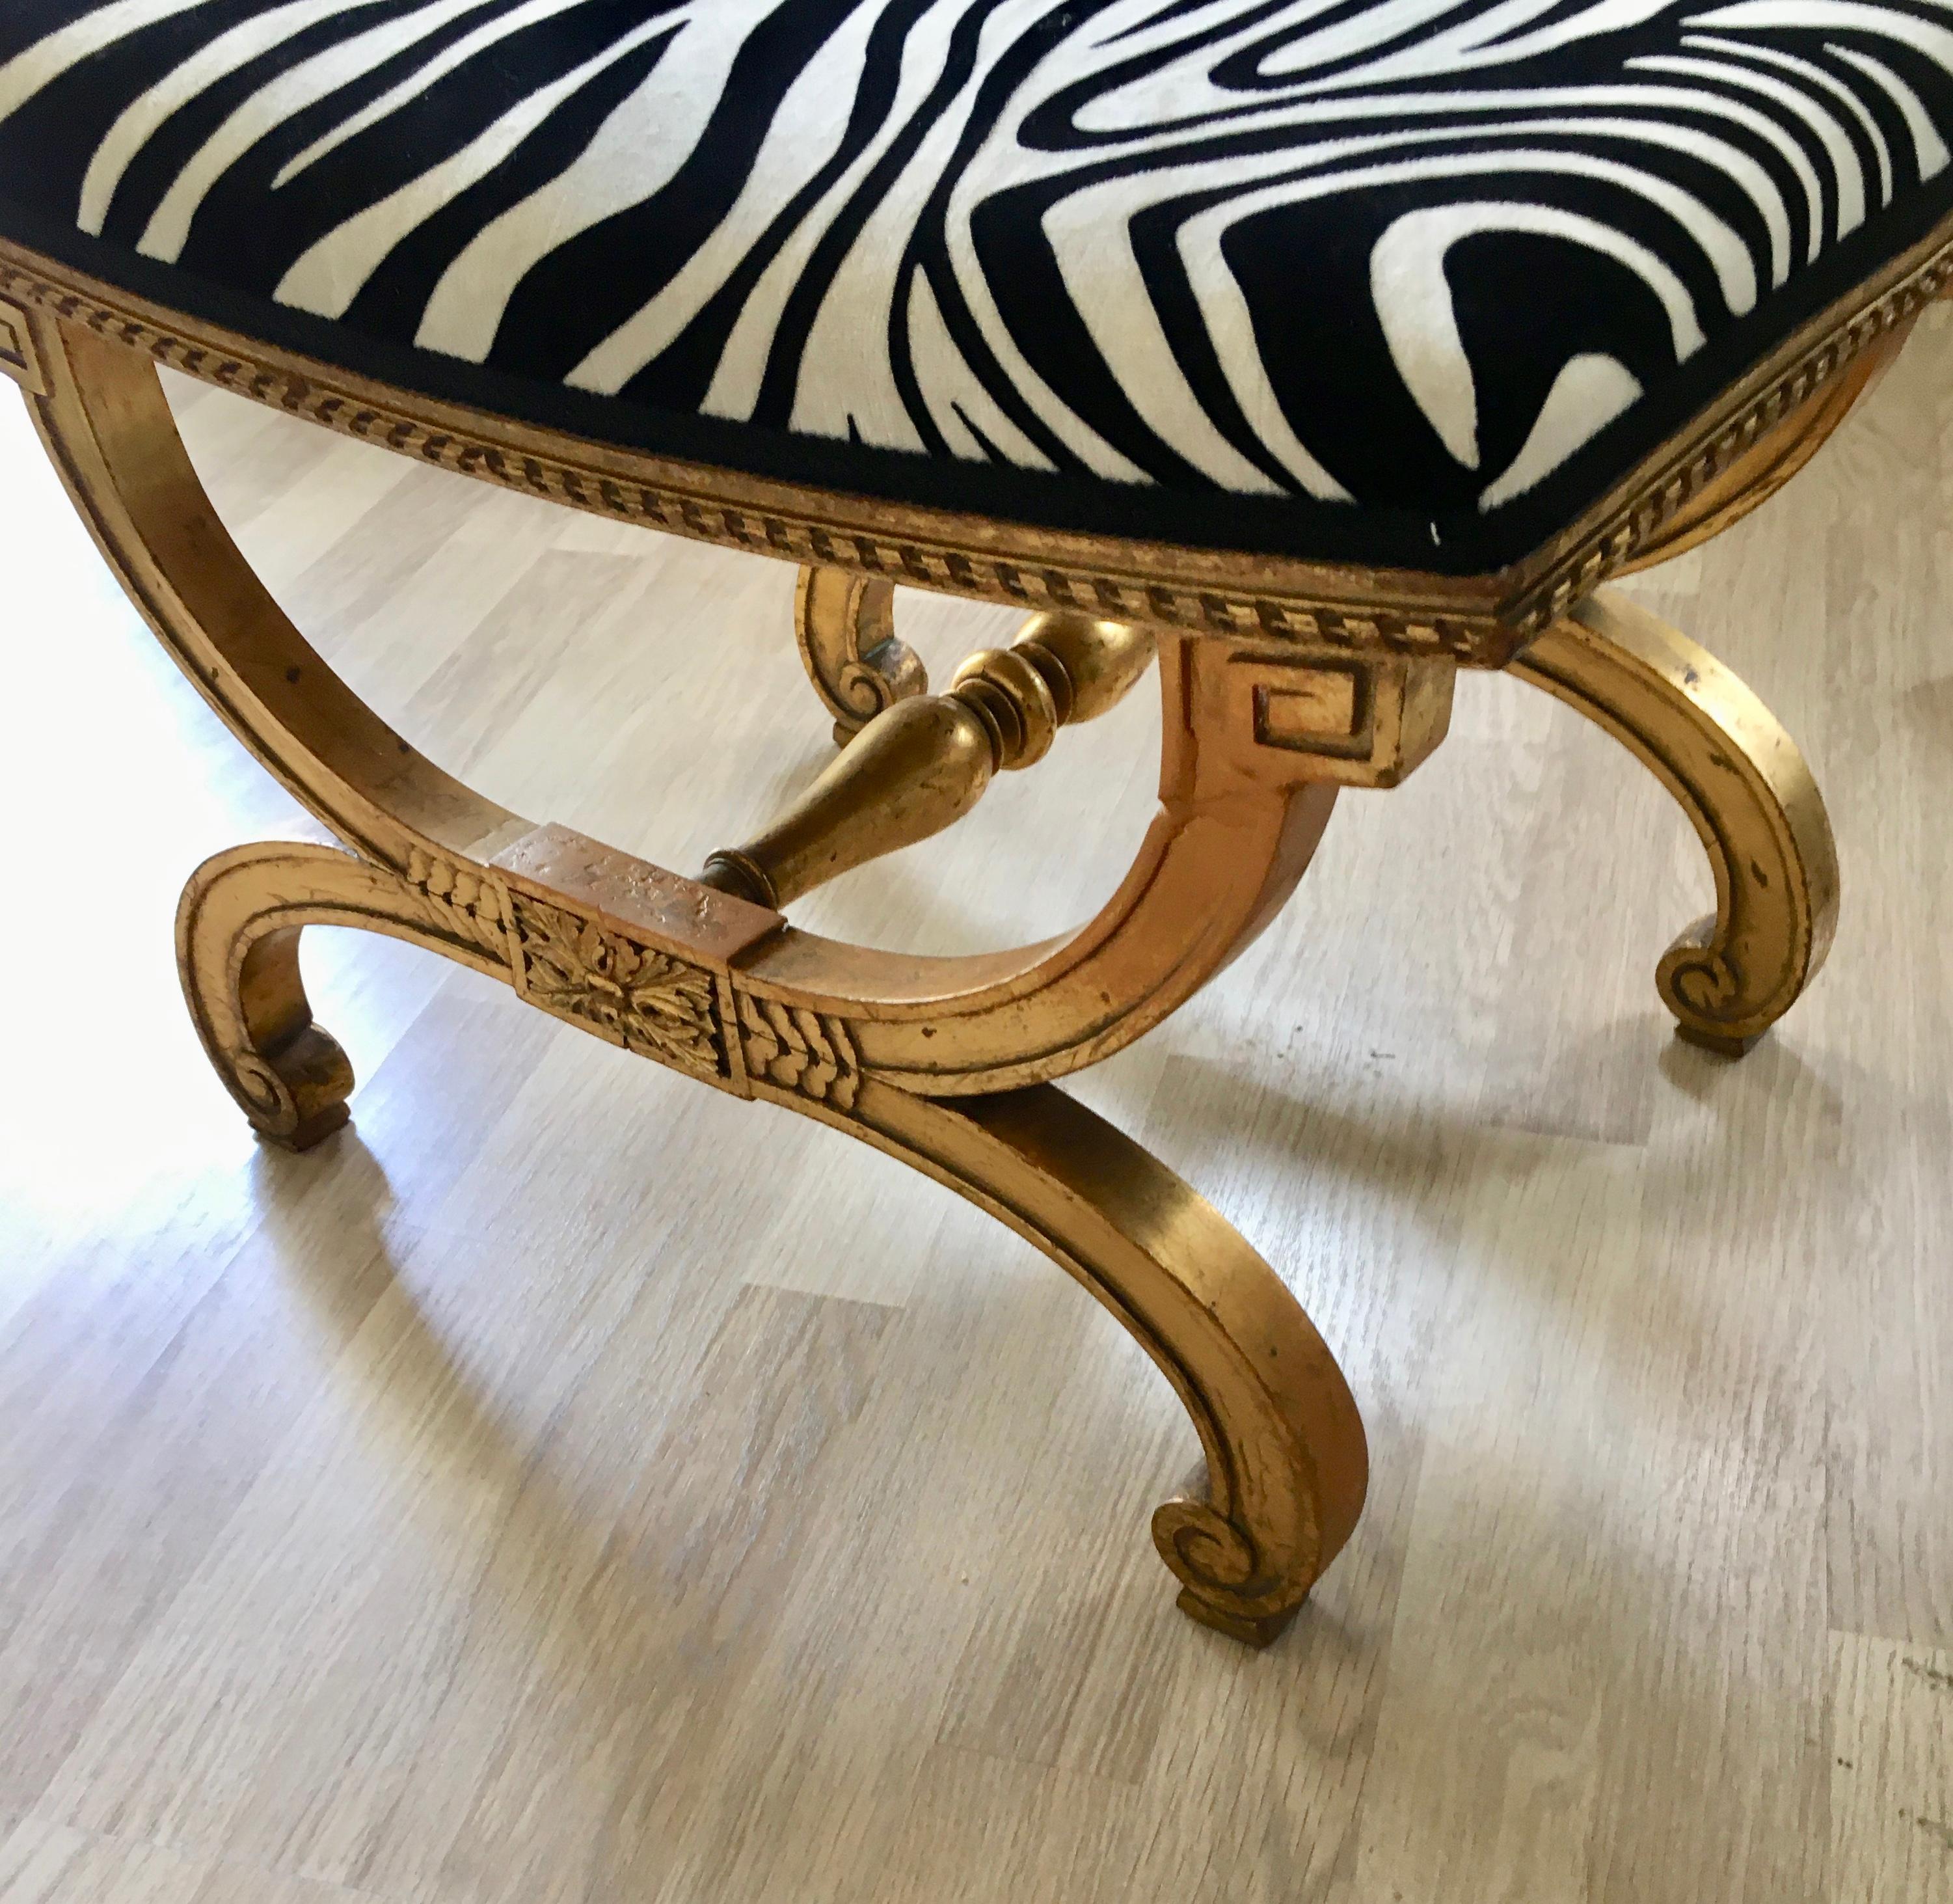 Hand carved ottoman with a fine gilding and reupholstered with a zebra fabric (Lelièvre-France).
France, 1920.